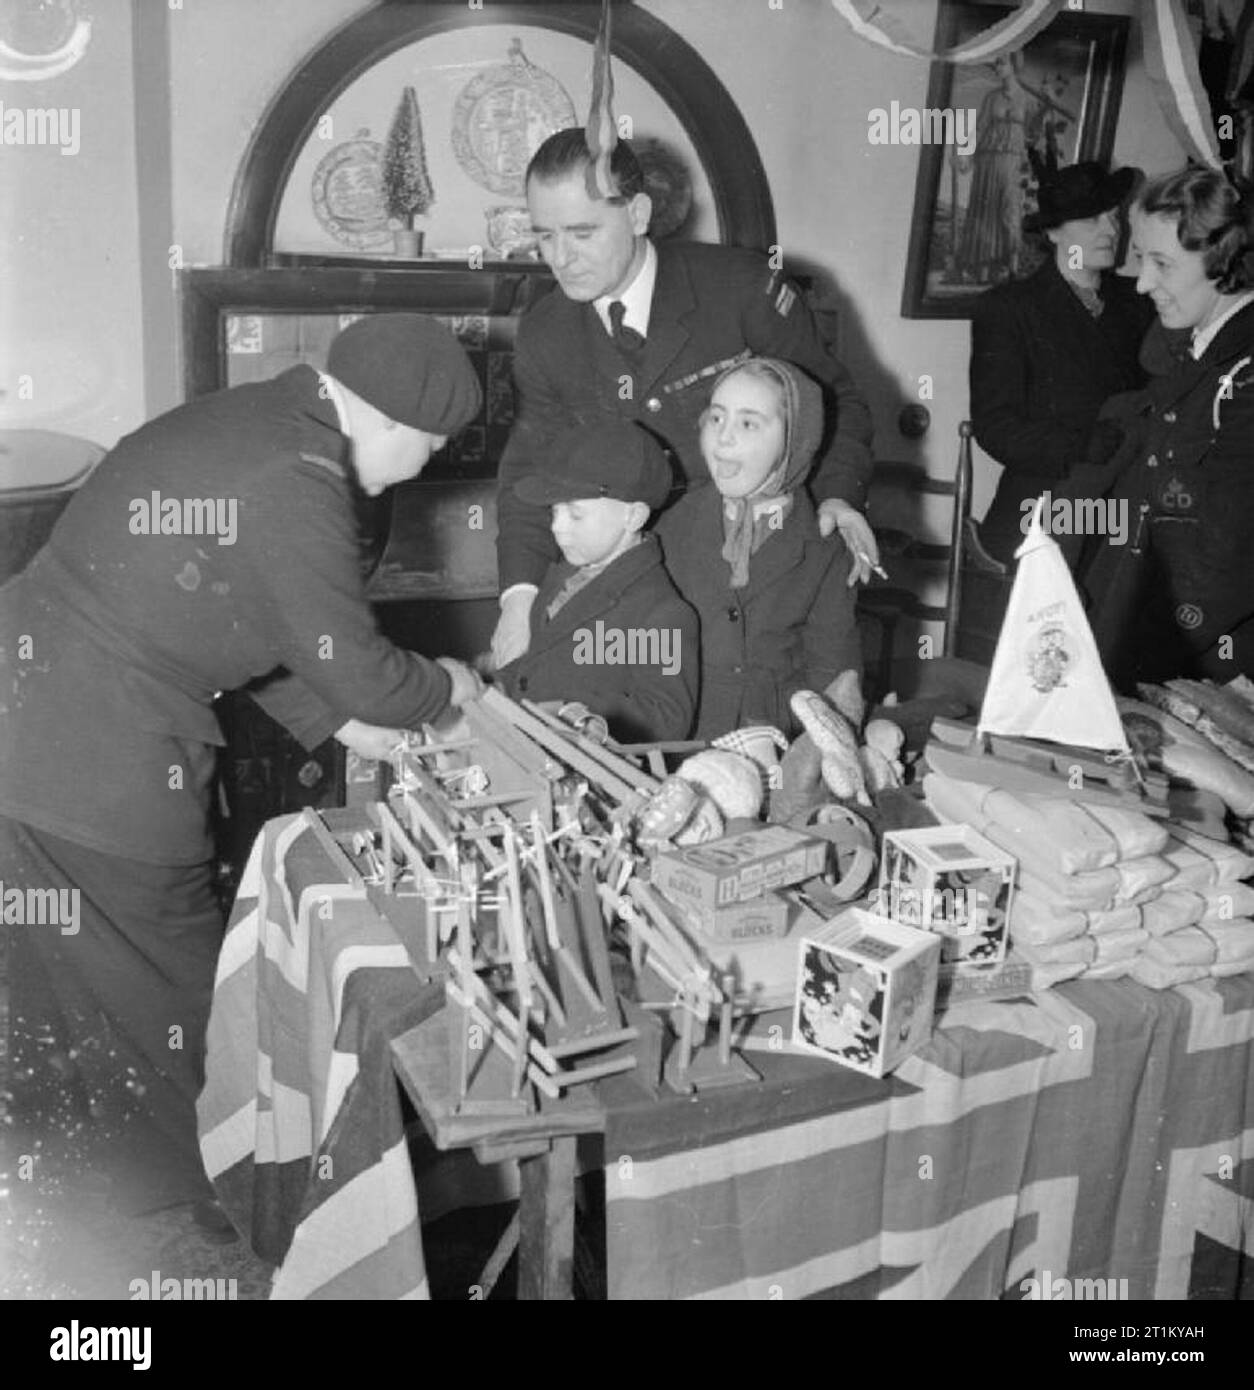 Bwrs Christmas Gifts Distributed To London's East Enders- American Aid To the Canning Town Settlement, London, England, UK, December 1944 Two young children at Canning Town settlement choose a toy each from the selection of gifts donated by America. They are assisted by two members of Civil Defence (possibly their parents). According to the original caption, there were 700 children at the settlement. Stock Photo